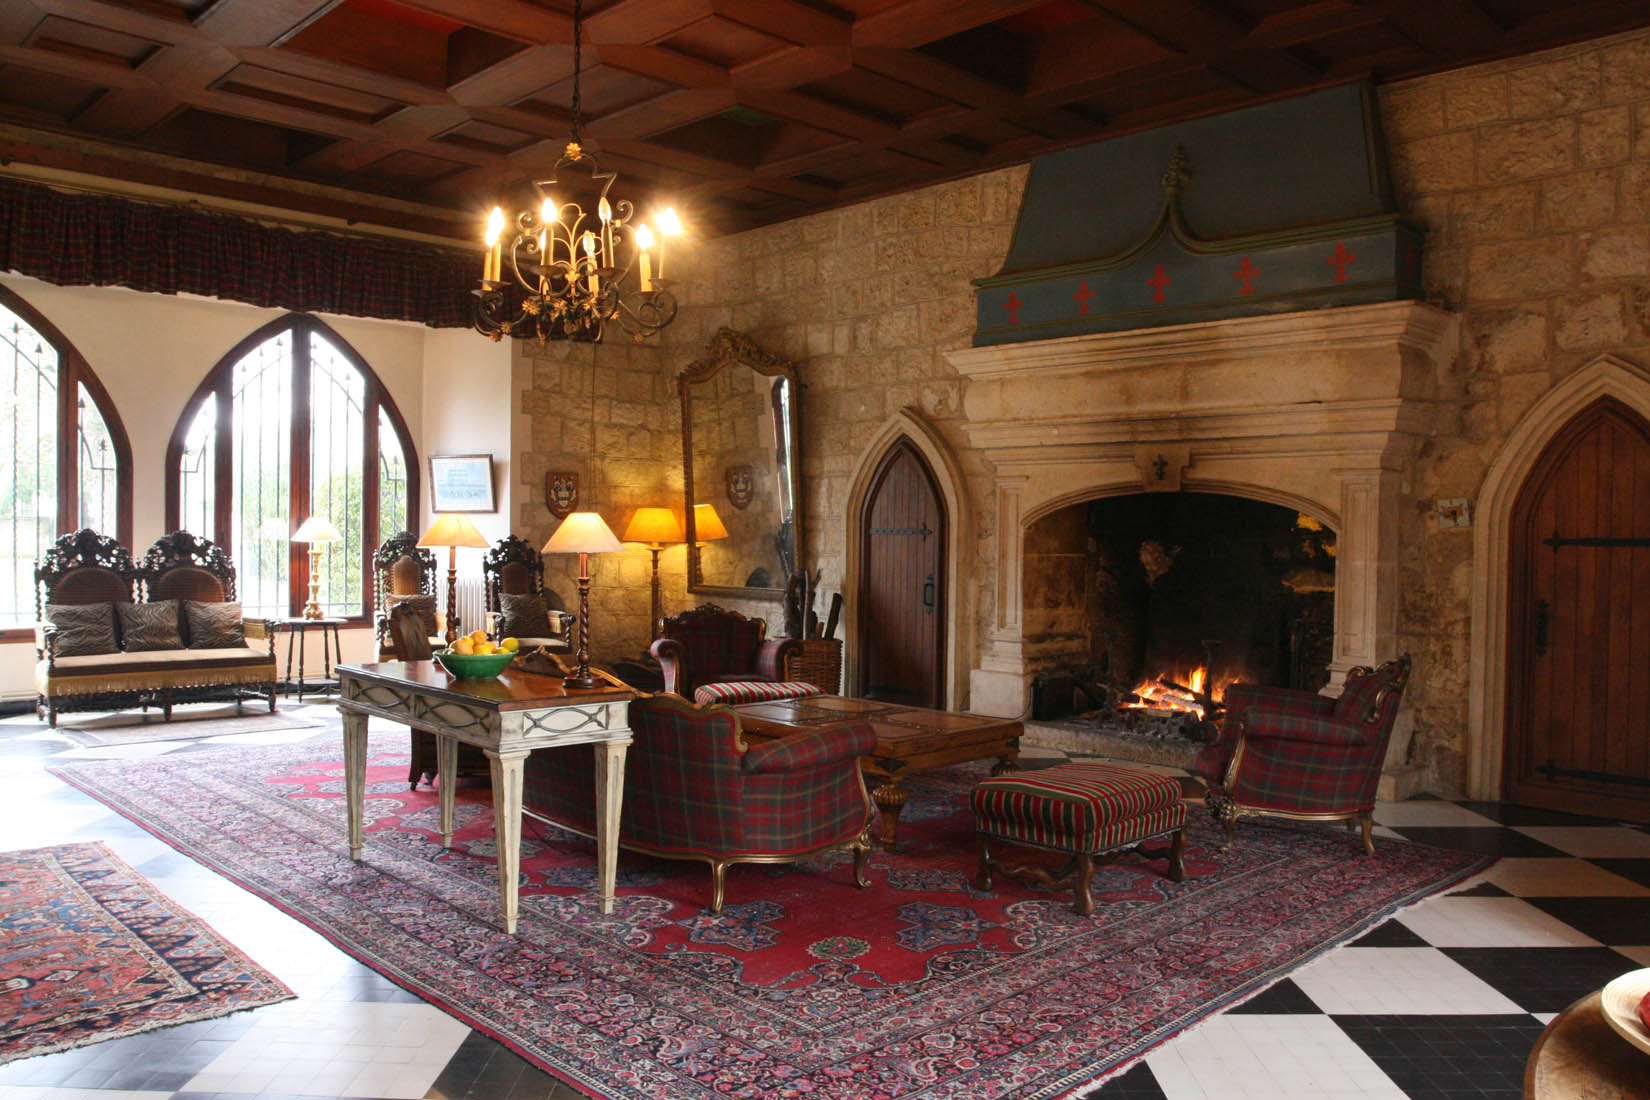 Rest area in front of the fireplace in the living room in the castle style